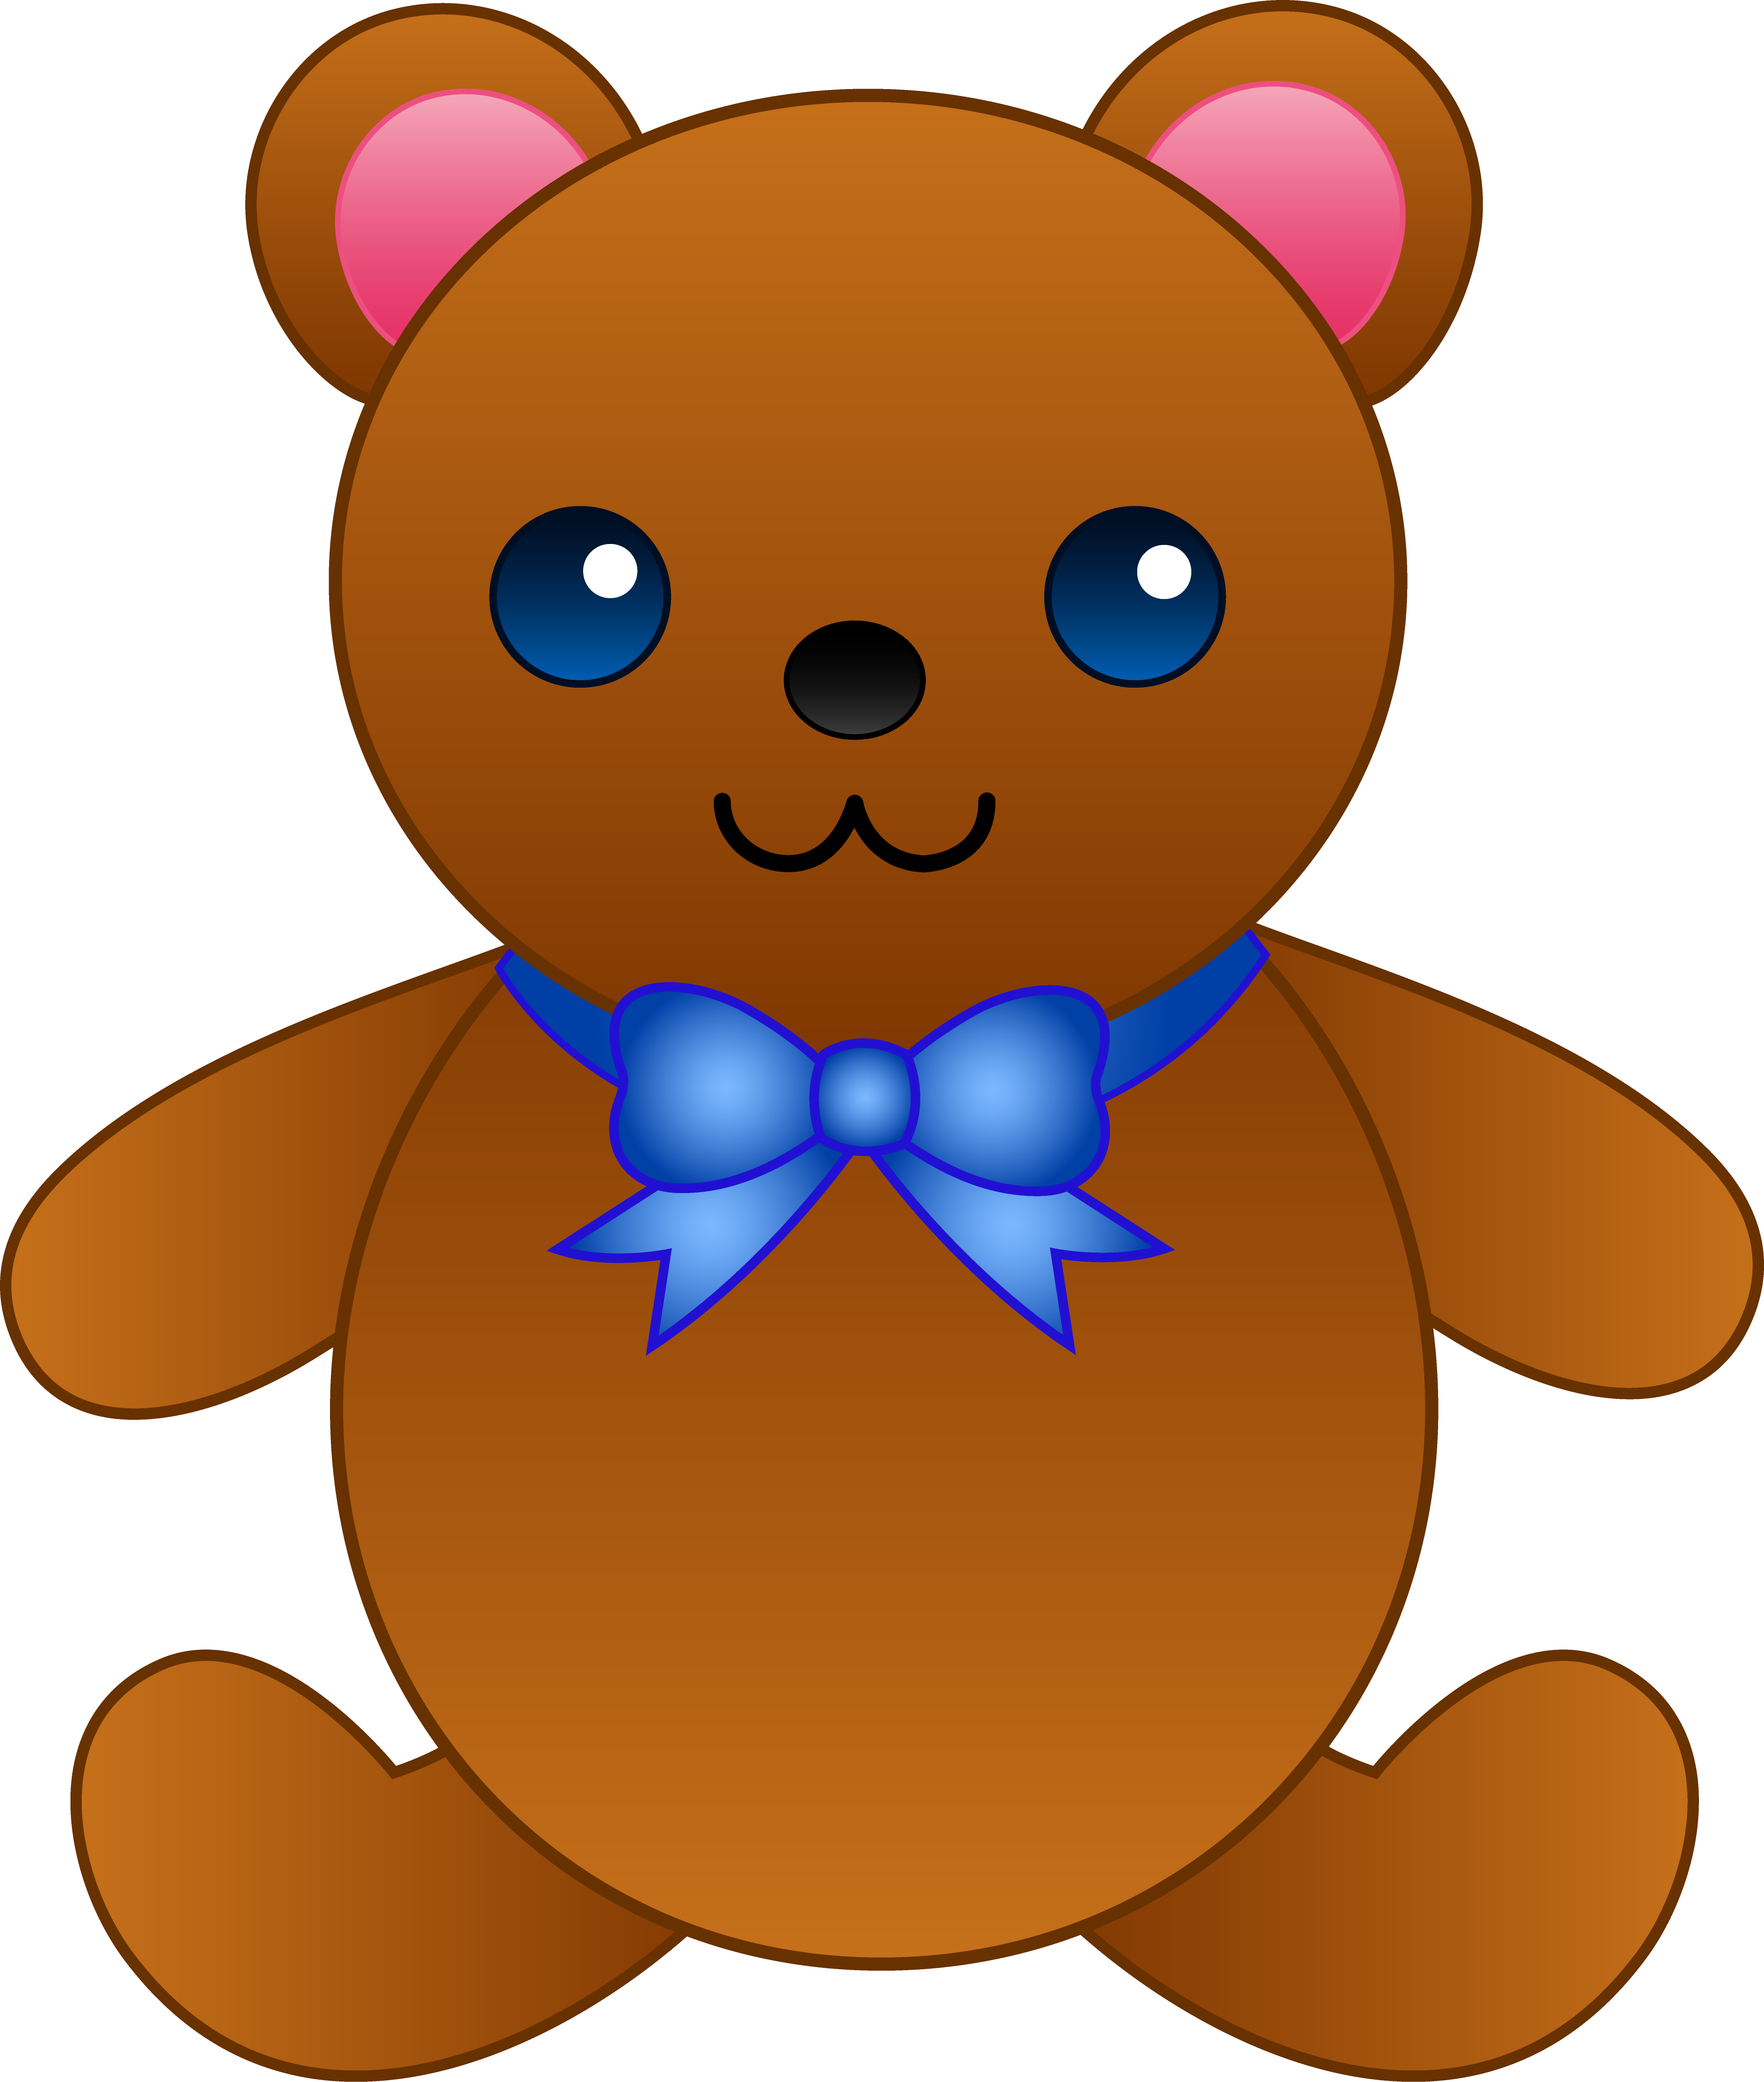 Two Bears Clipart   Cliparthut   Free Clipart